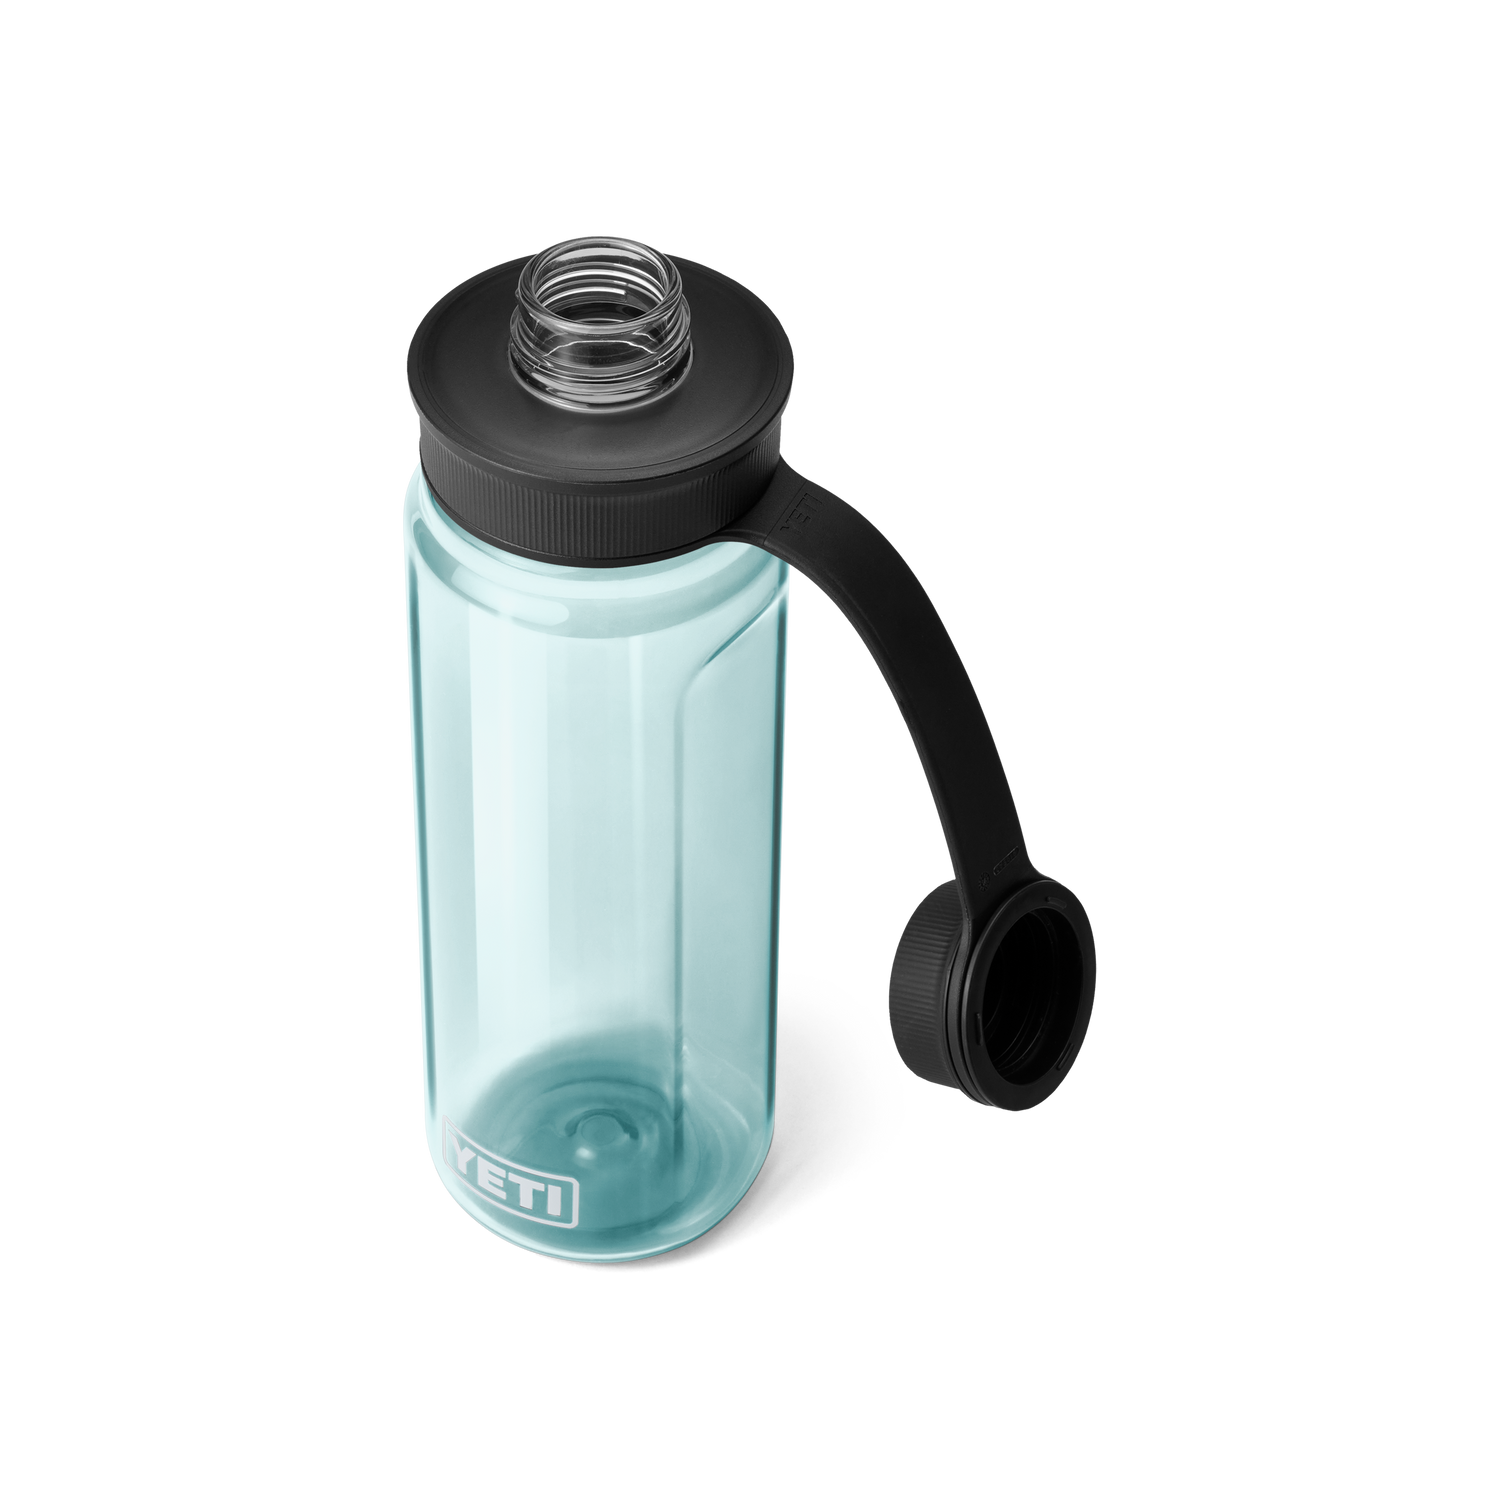 site_studio_Drinkware_Yonder_Tether_Accs_750mL_Seafoam_3qtr_Open_0842_Primary_B_2400x2400.png